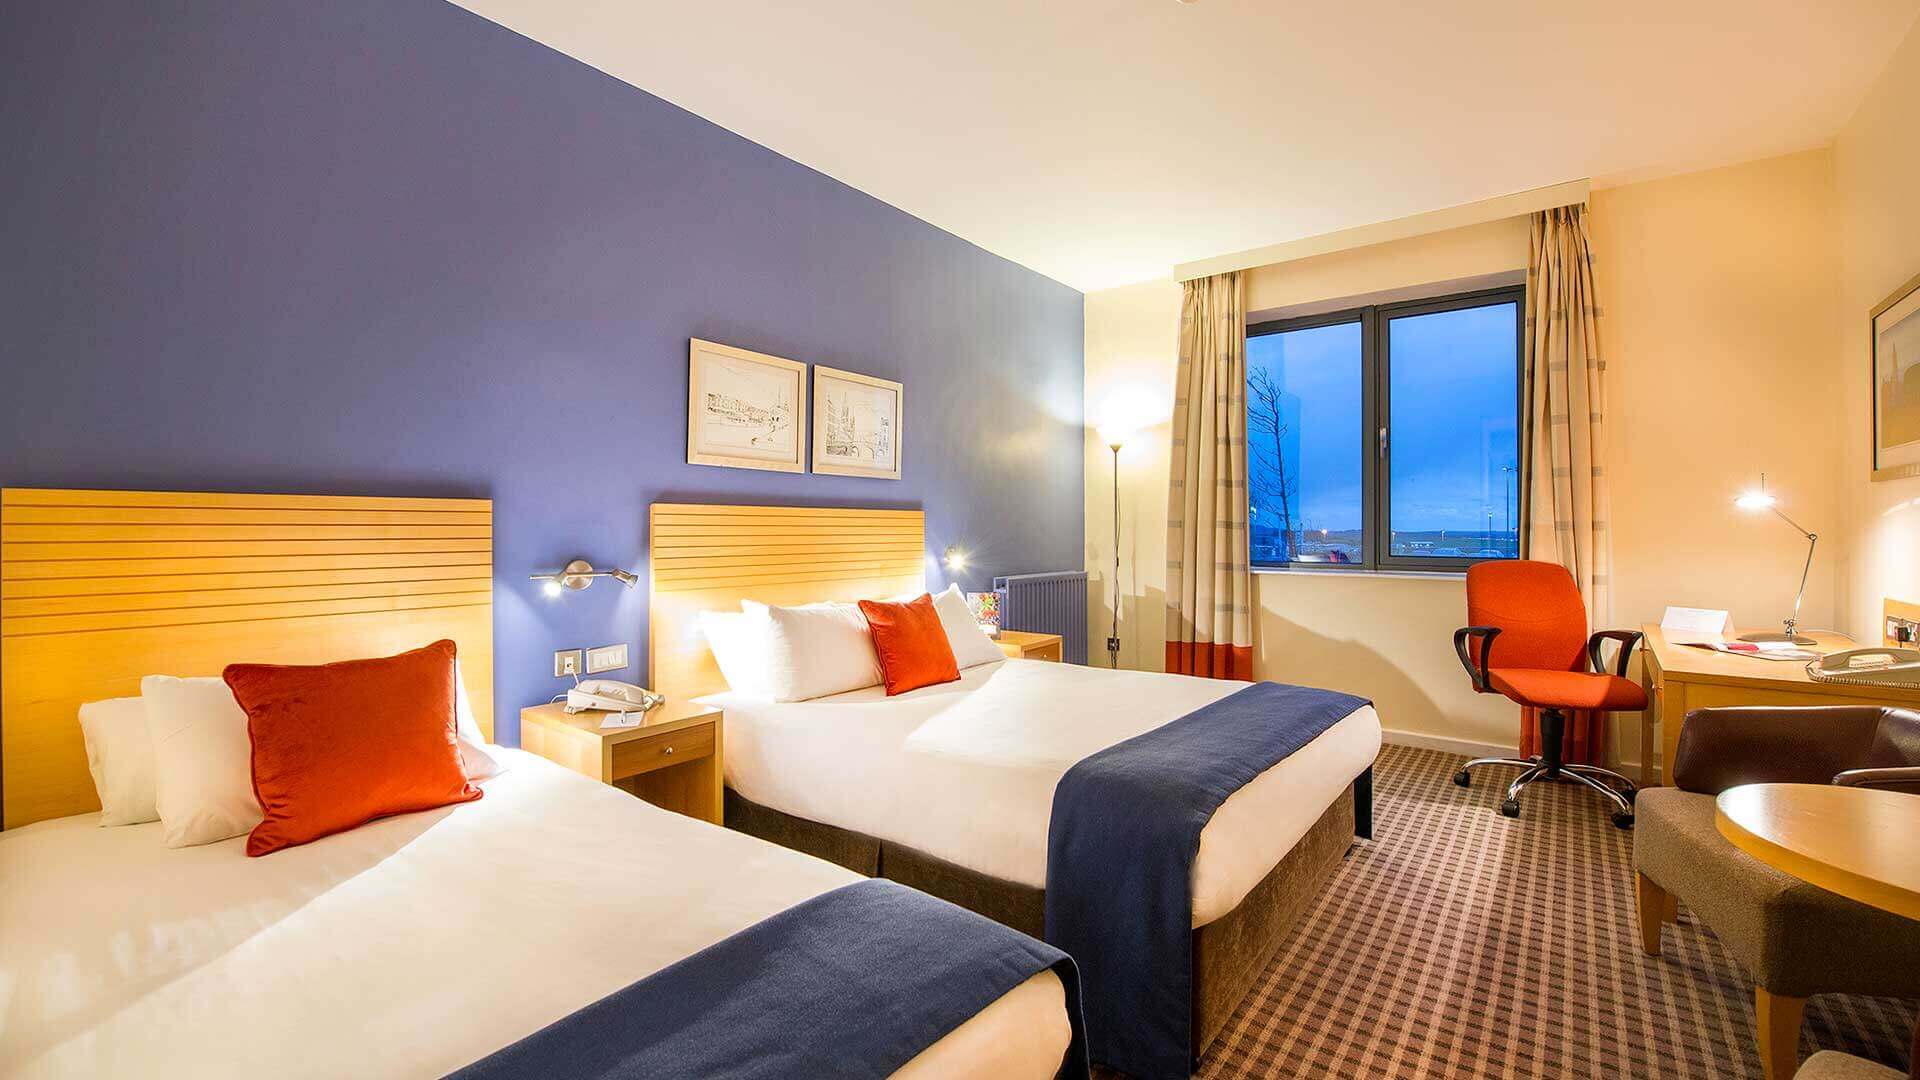 Family Room at Cork Airport Hotel with two comfortable, roomy beds and seating area